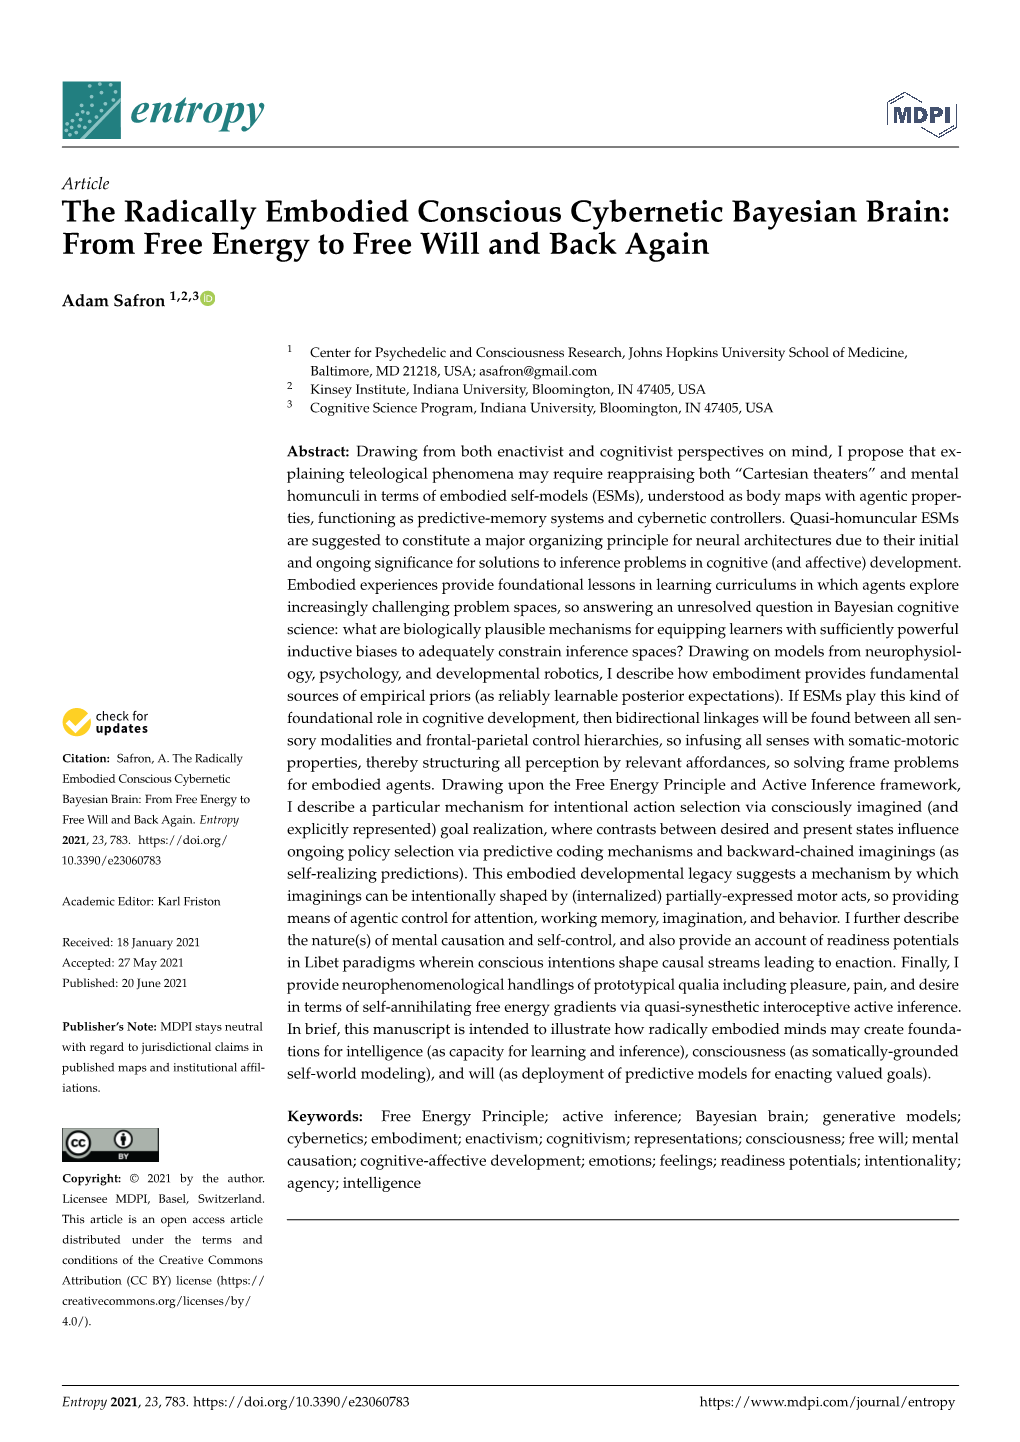 The Radically Embodied Conscious Cybernetic Bayesian Brain: from Free Energy to Free Will and Back Again